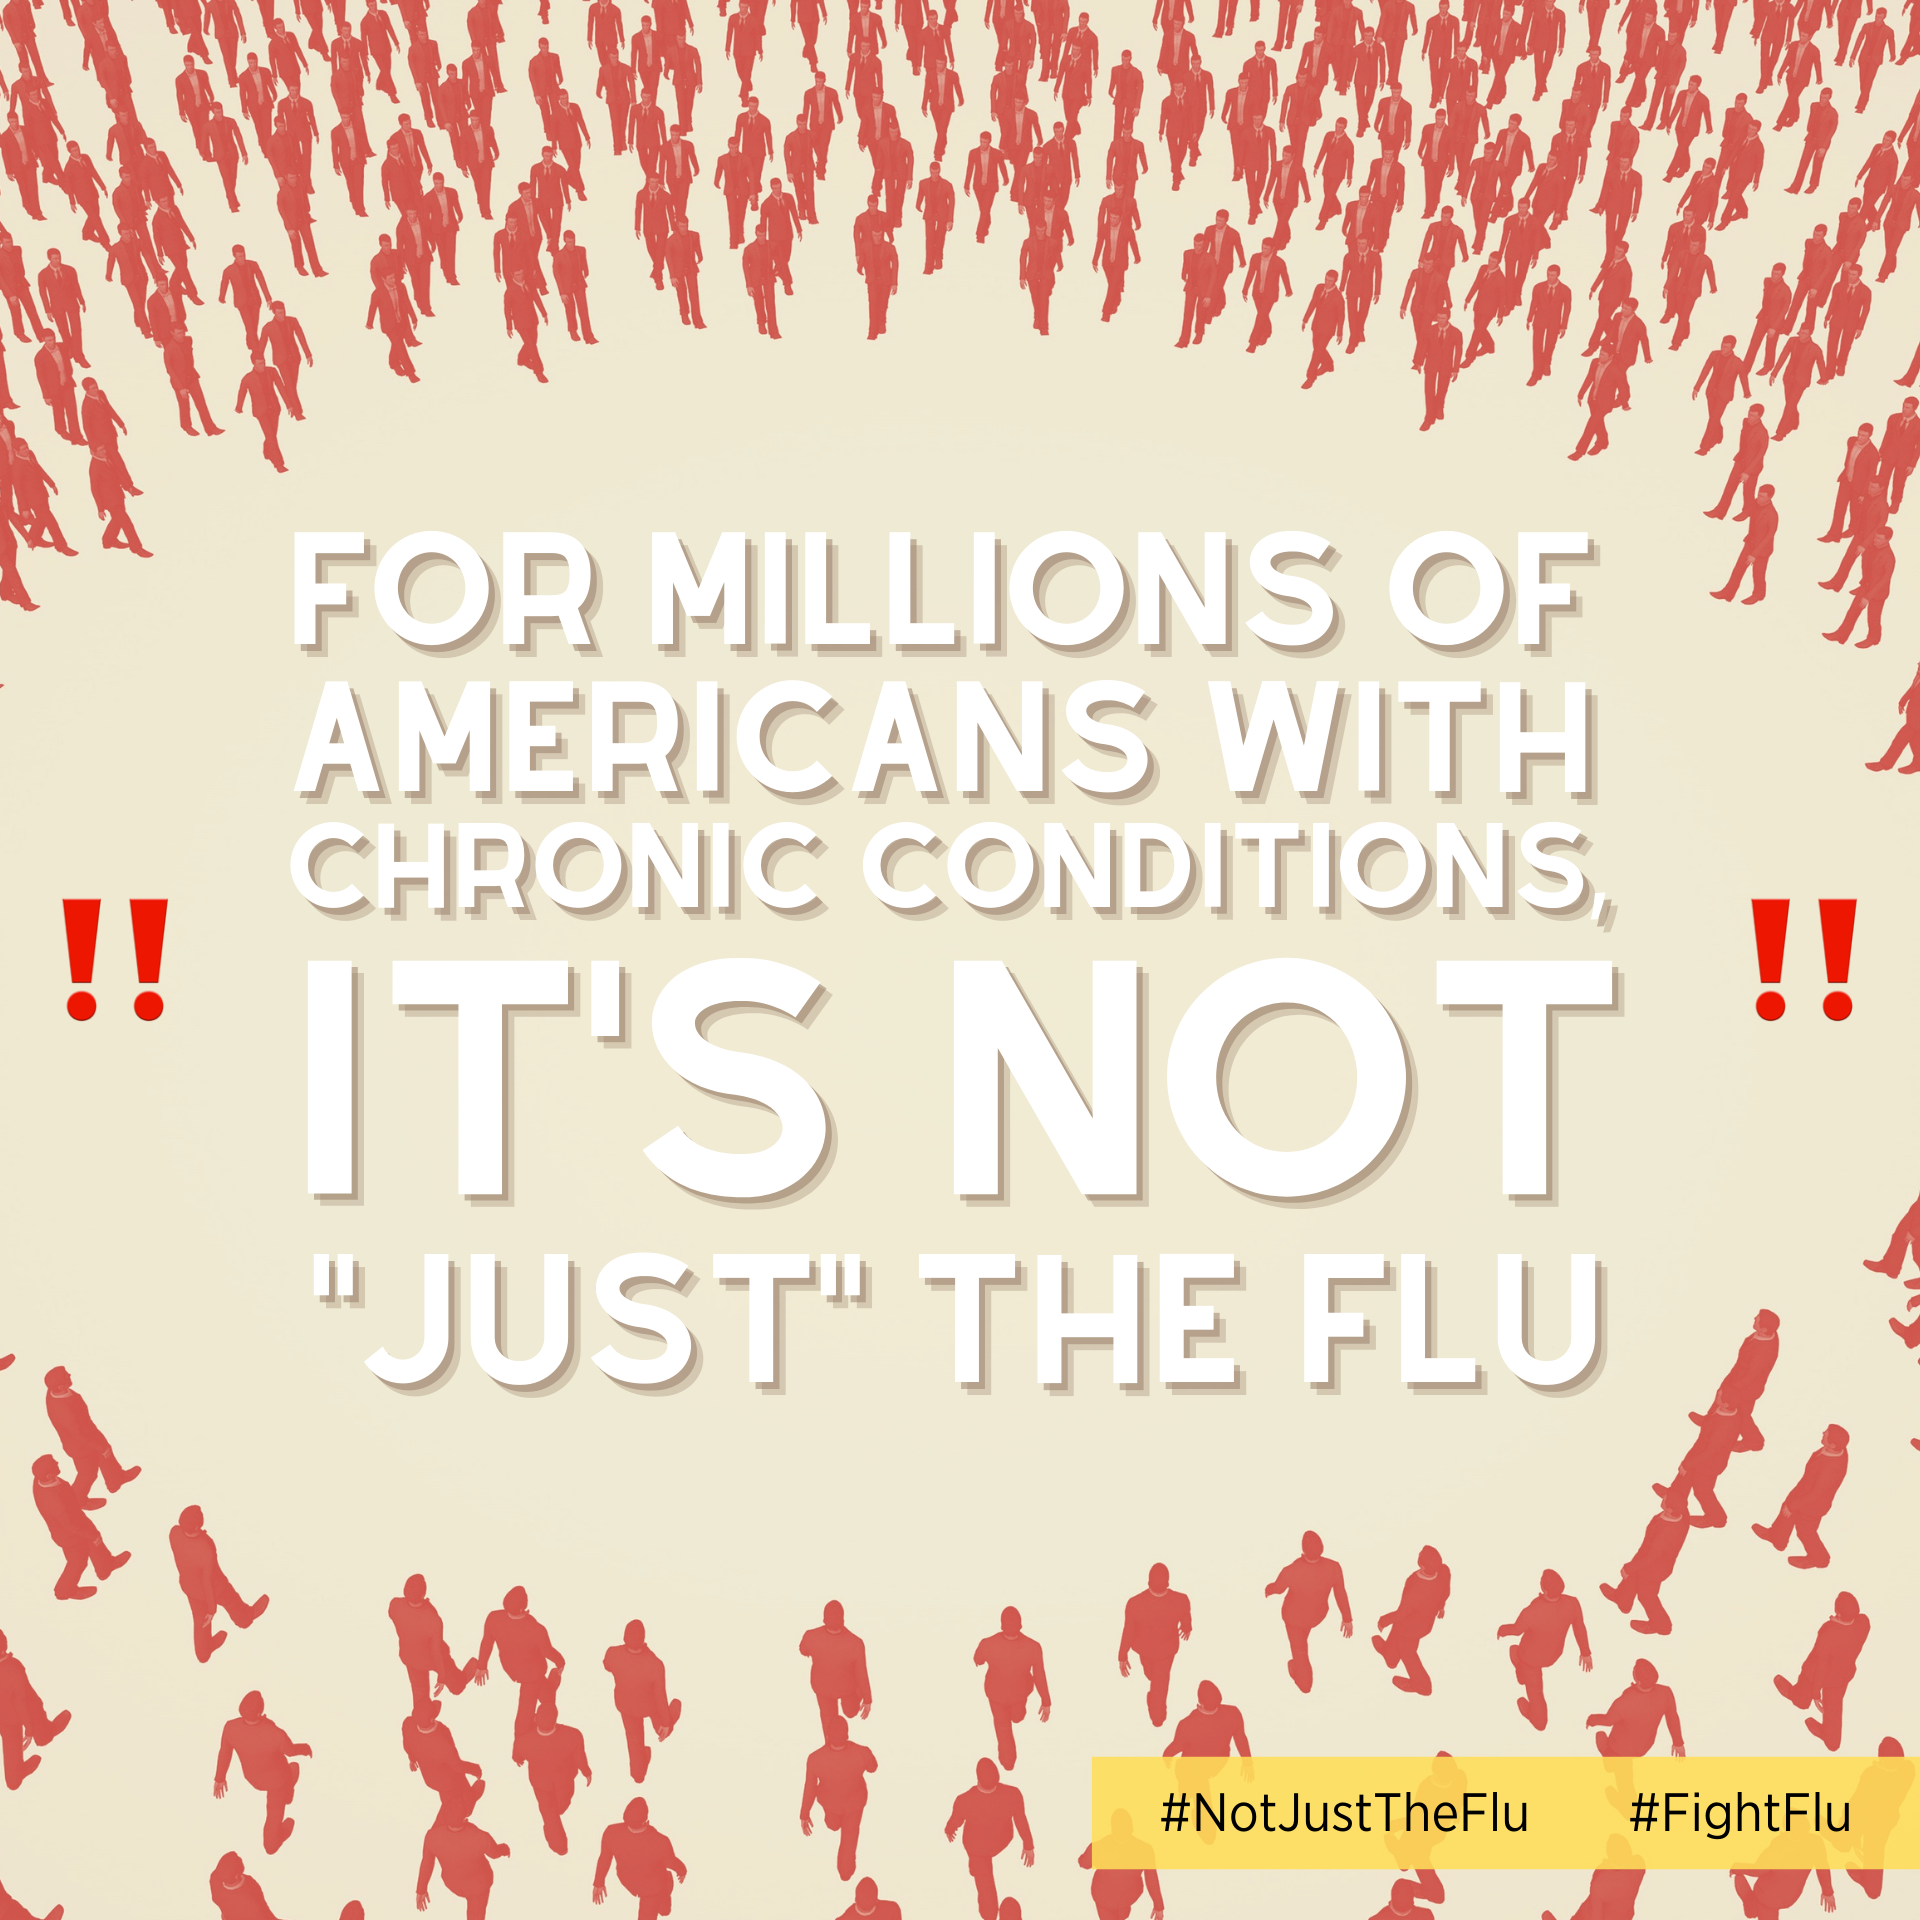 Cartoon image of a crowd of red figures around text reading, "For millions of Americans with chronic conditions, it’s not “just” the flu. Did you know that flu vaccination has been shown to reduce the risk of flu-related hospitalization in people with diabetes by almost 80%?"